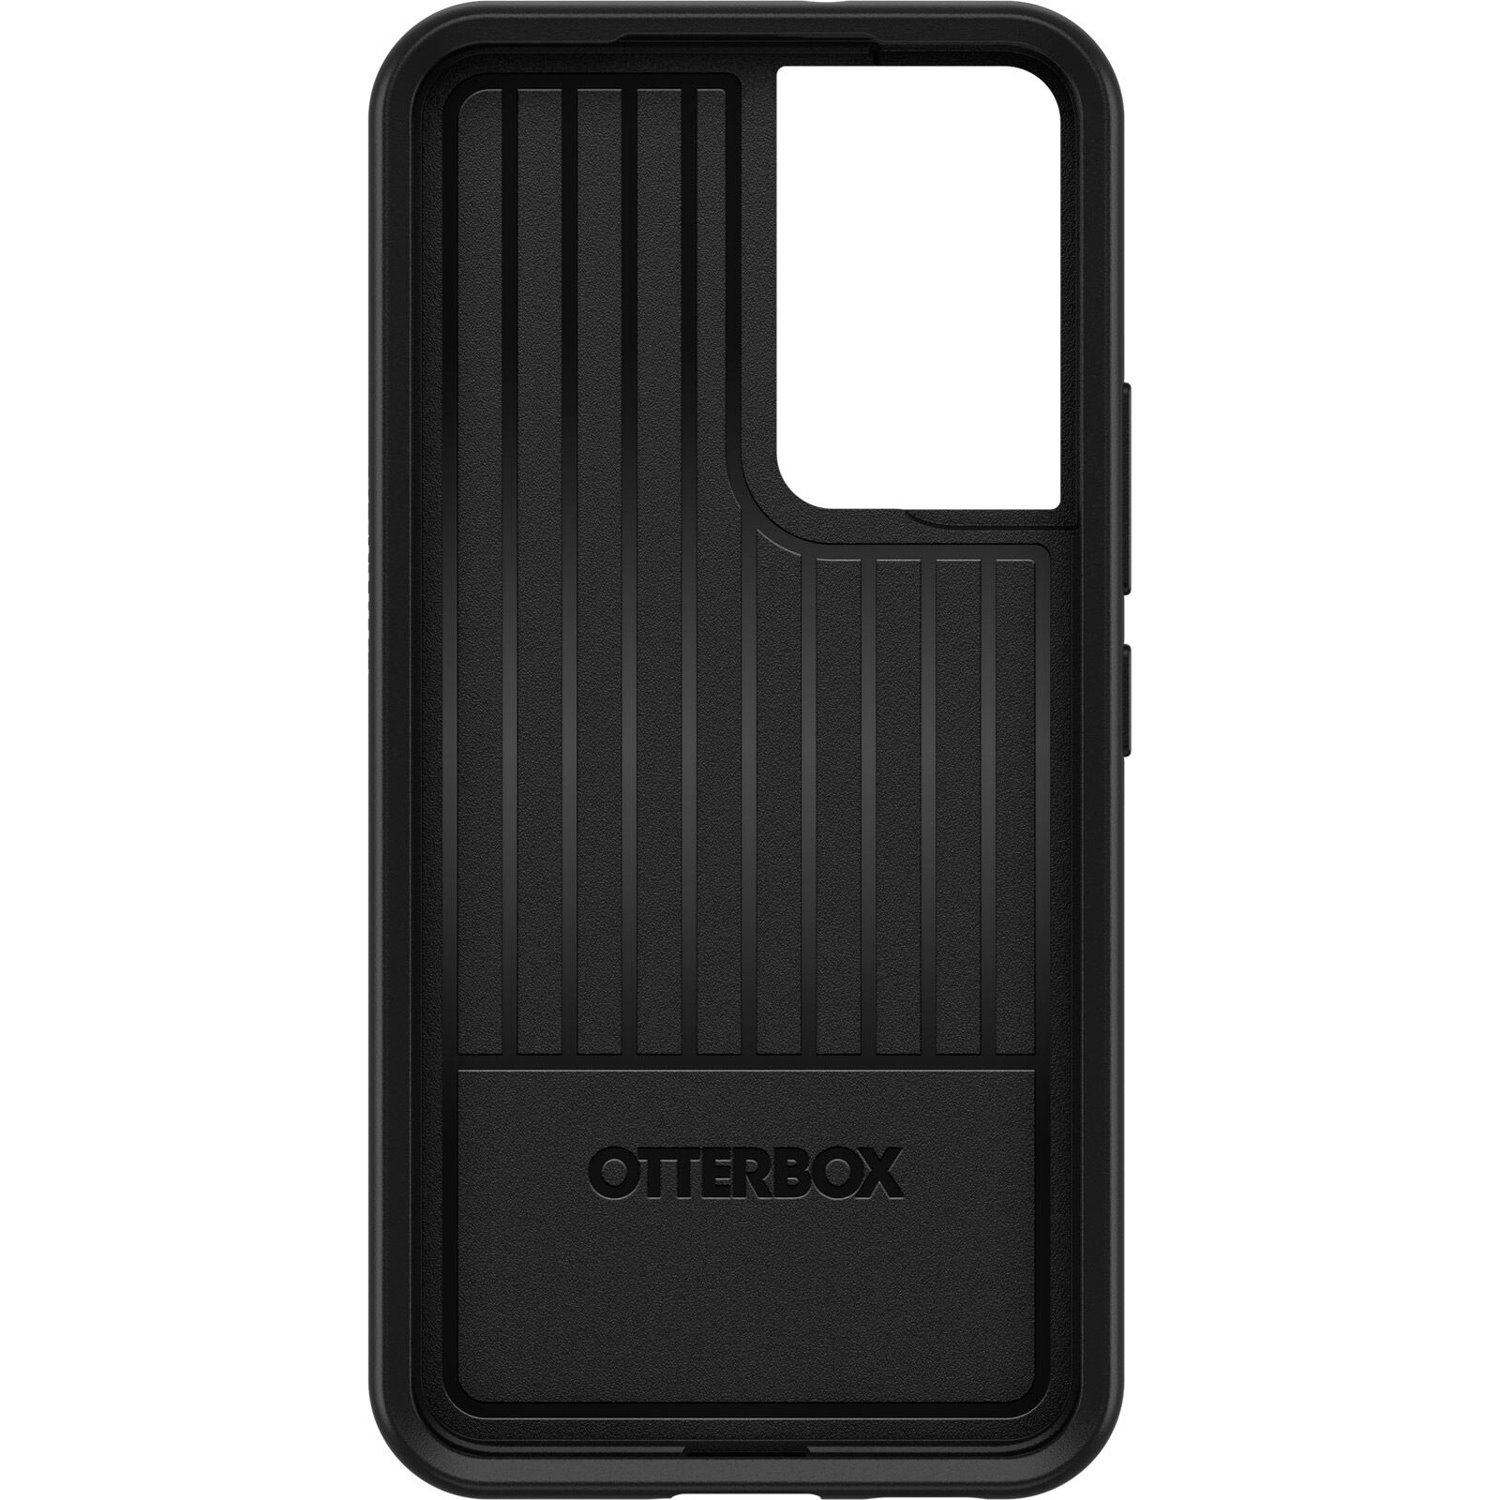 OtterBox Symmetry Case for Samsung Galaxy S22 Smartphone - Black